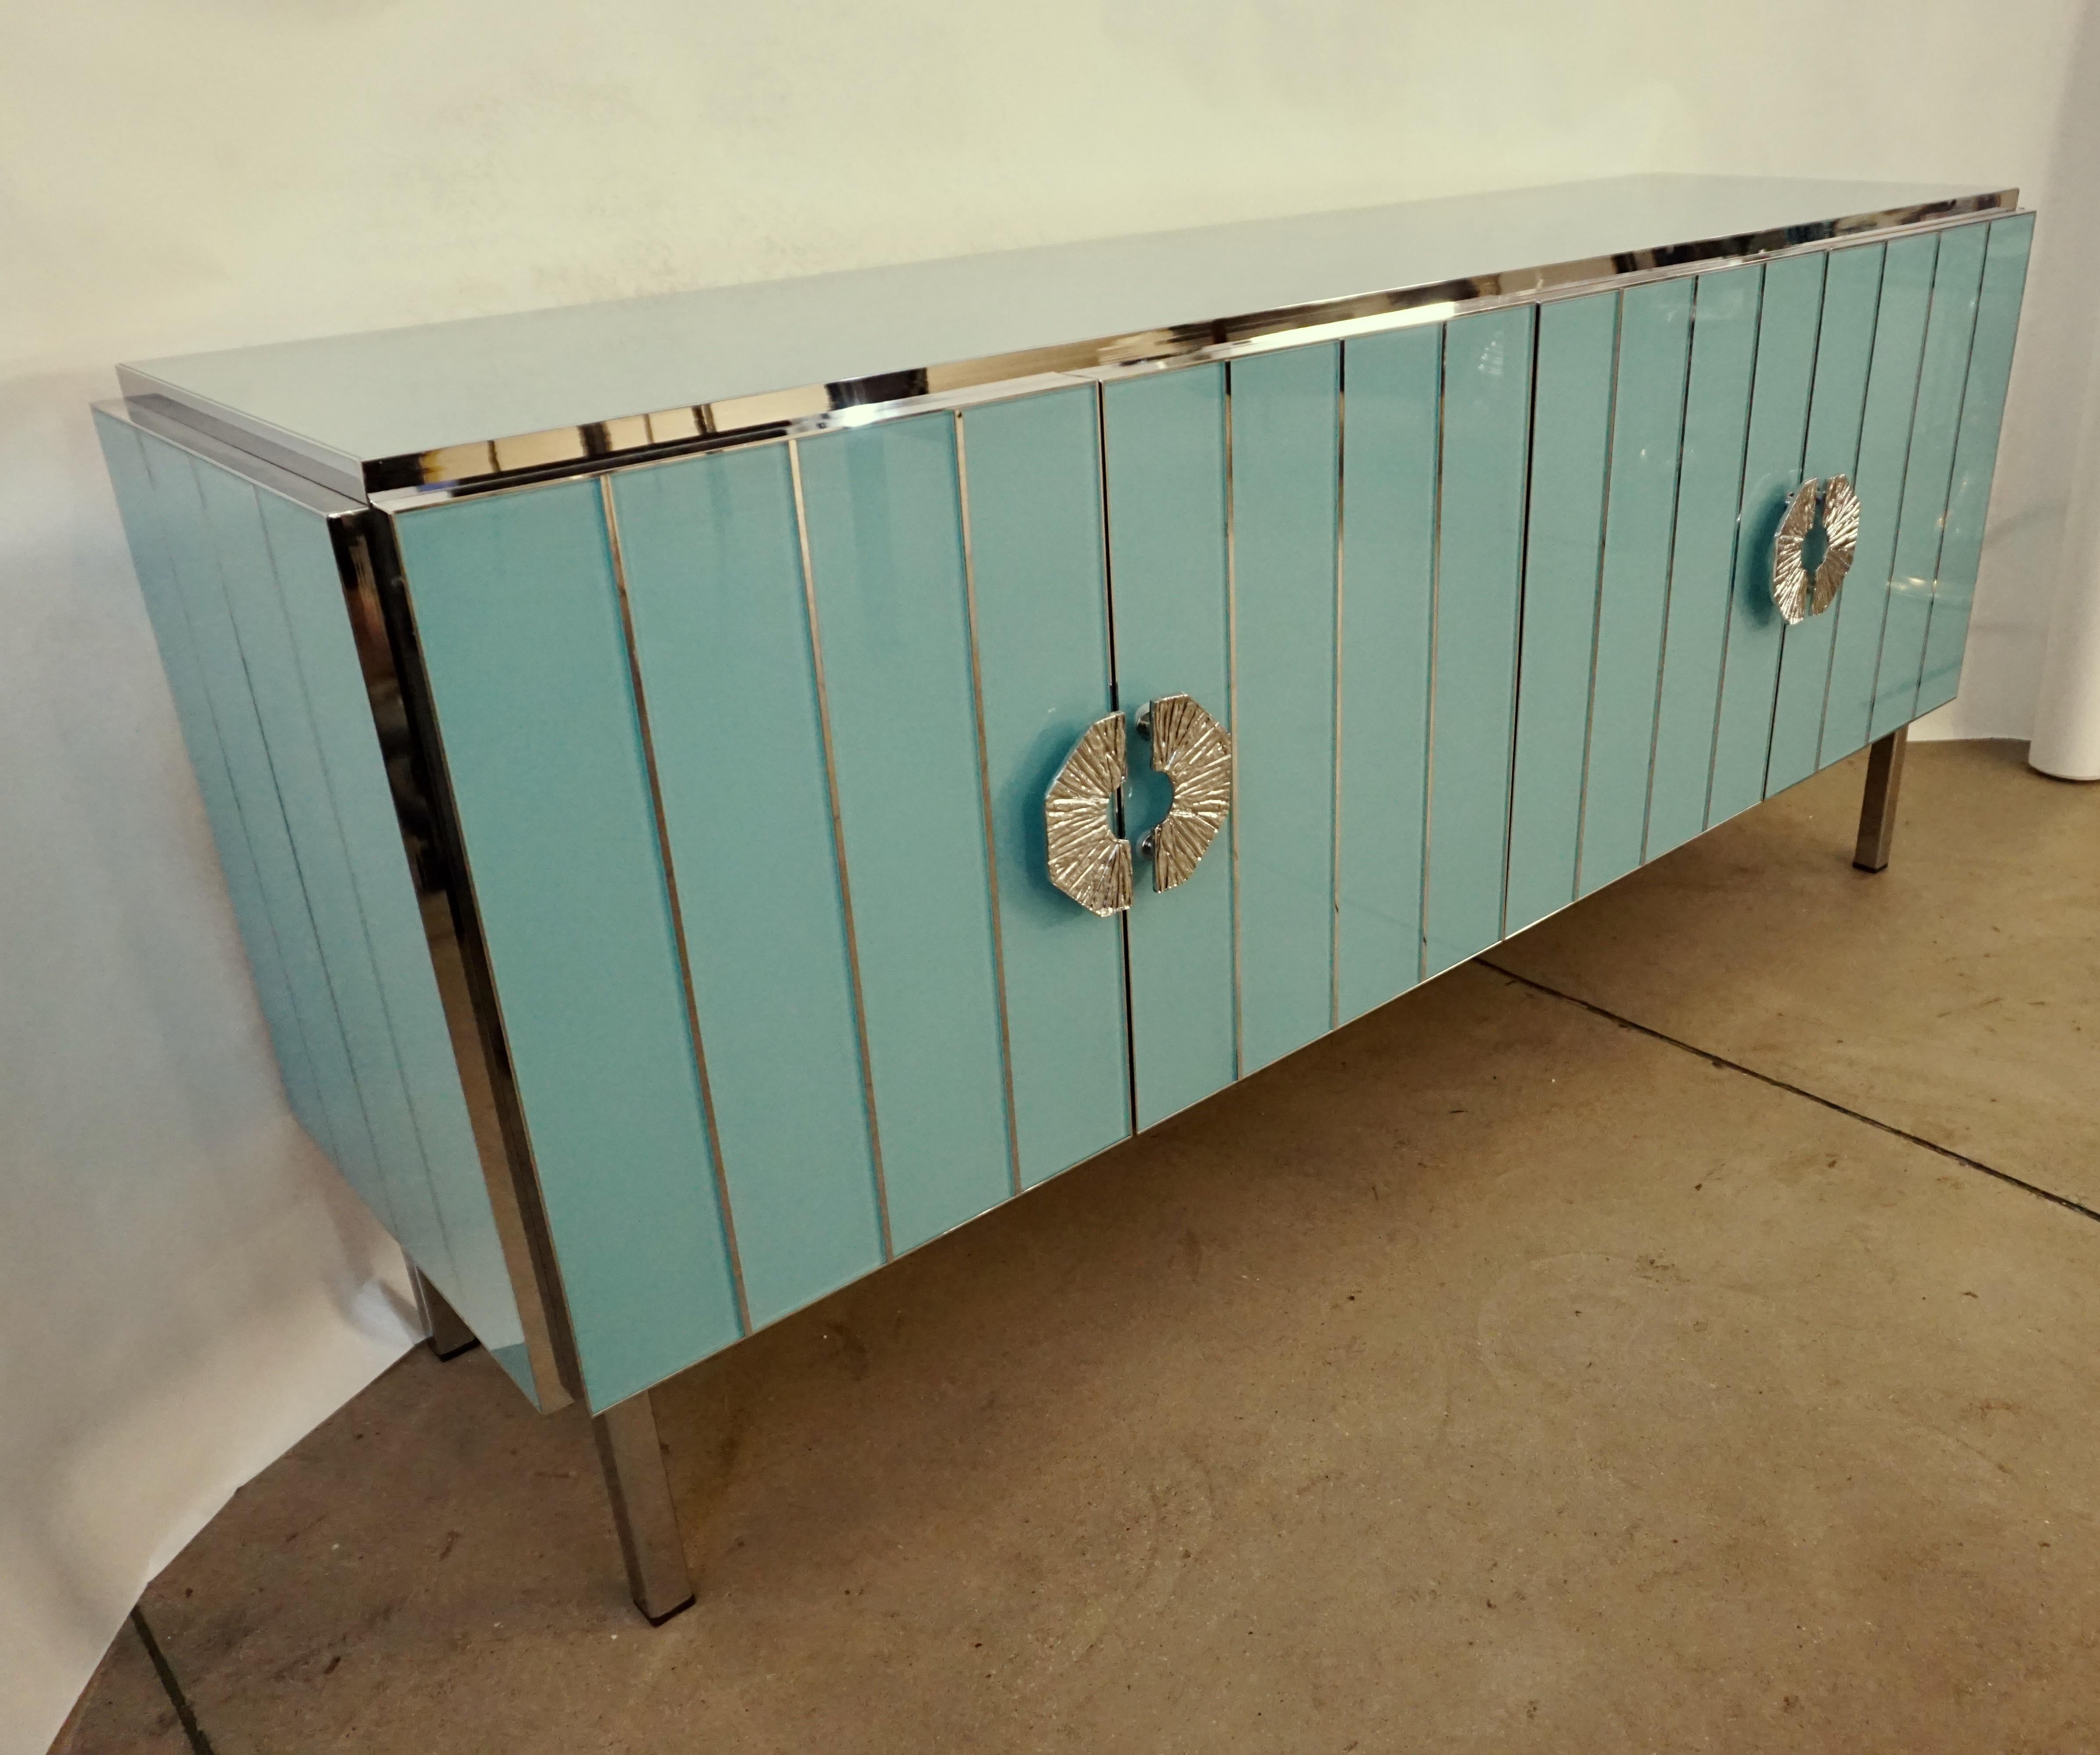 Bespoke customizable 4-door credenza/sideboard entirely handcrafted in Italy with elegant Art Deco style, the surround decorated with art glass in an enticing aquamarine pastel blue, striped with nickel inserts, raised on geometric straight nickel